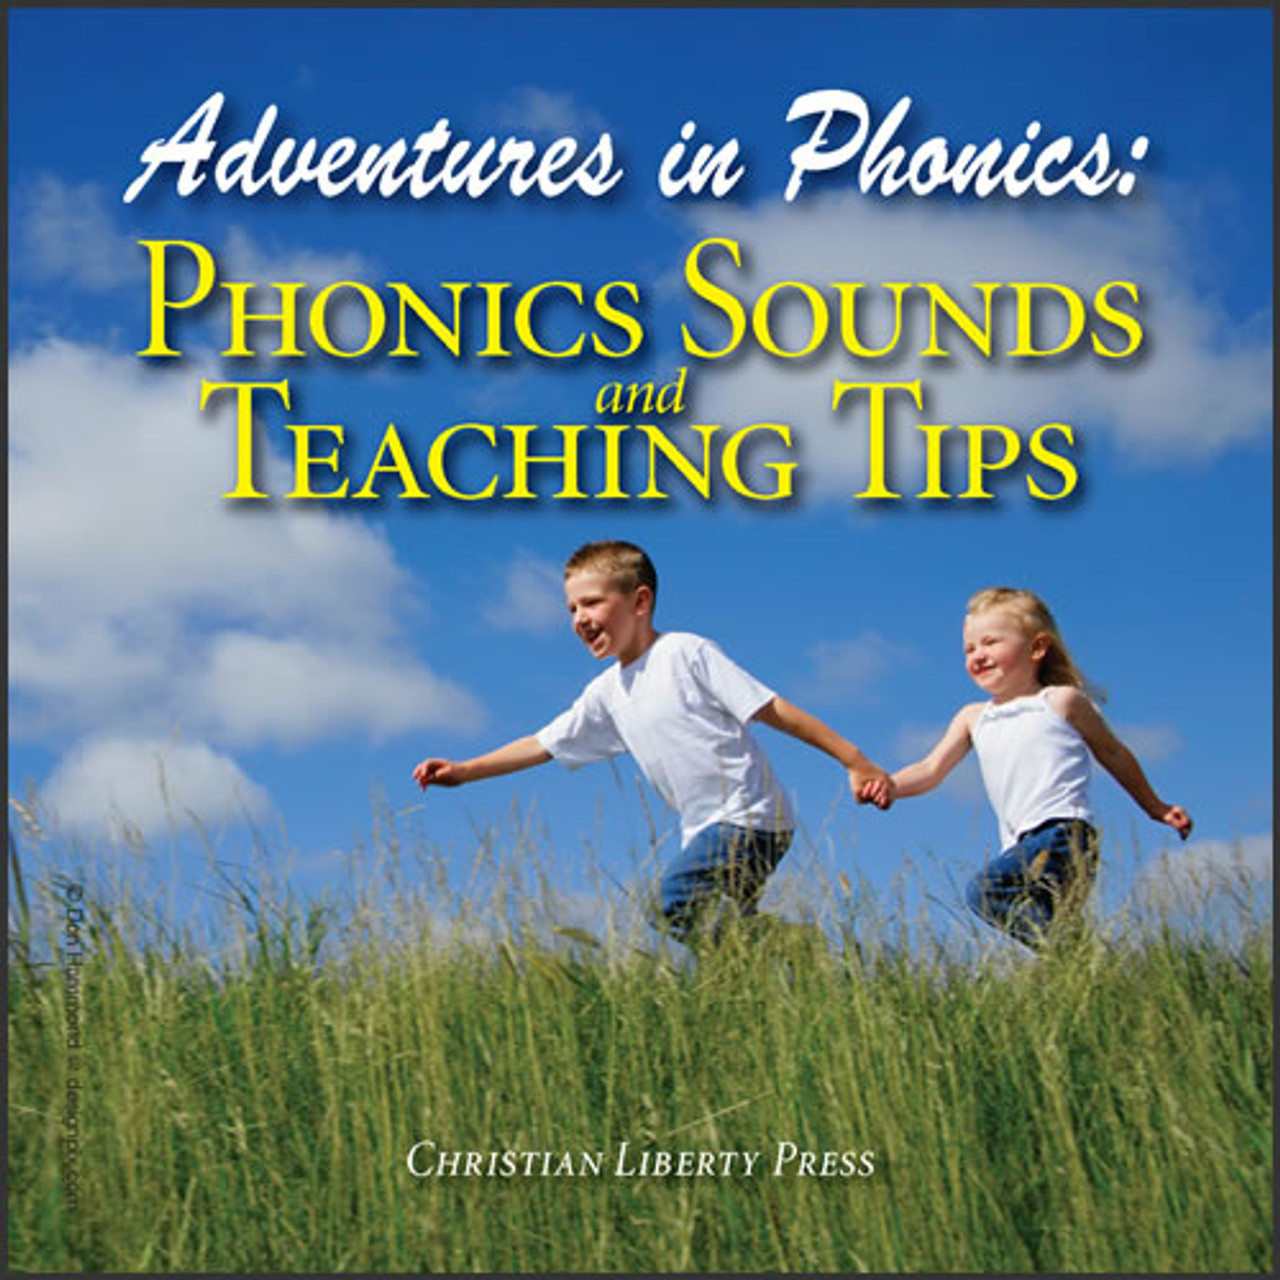 Adventures in Phonics: Phonics Sounds and Teaching Tips